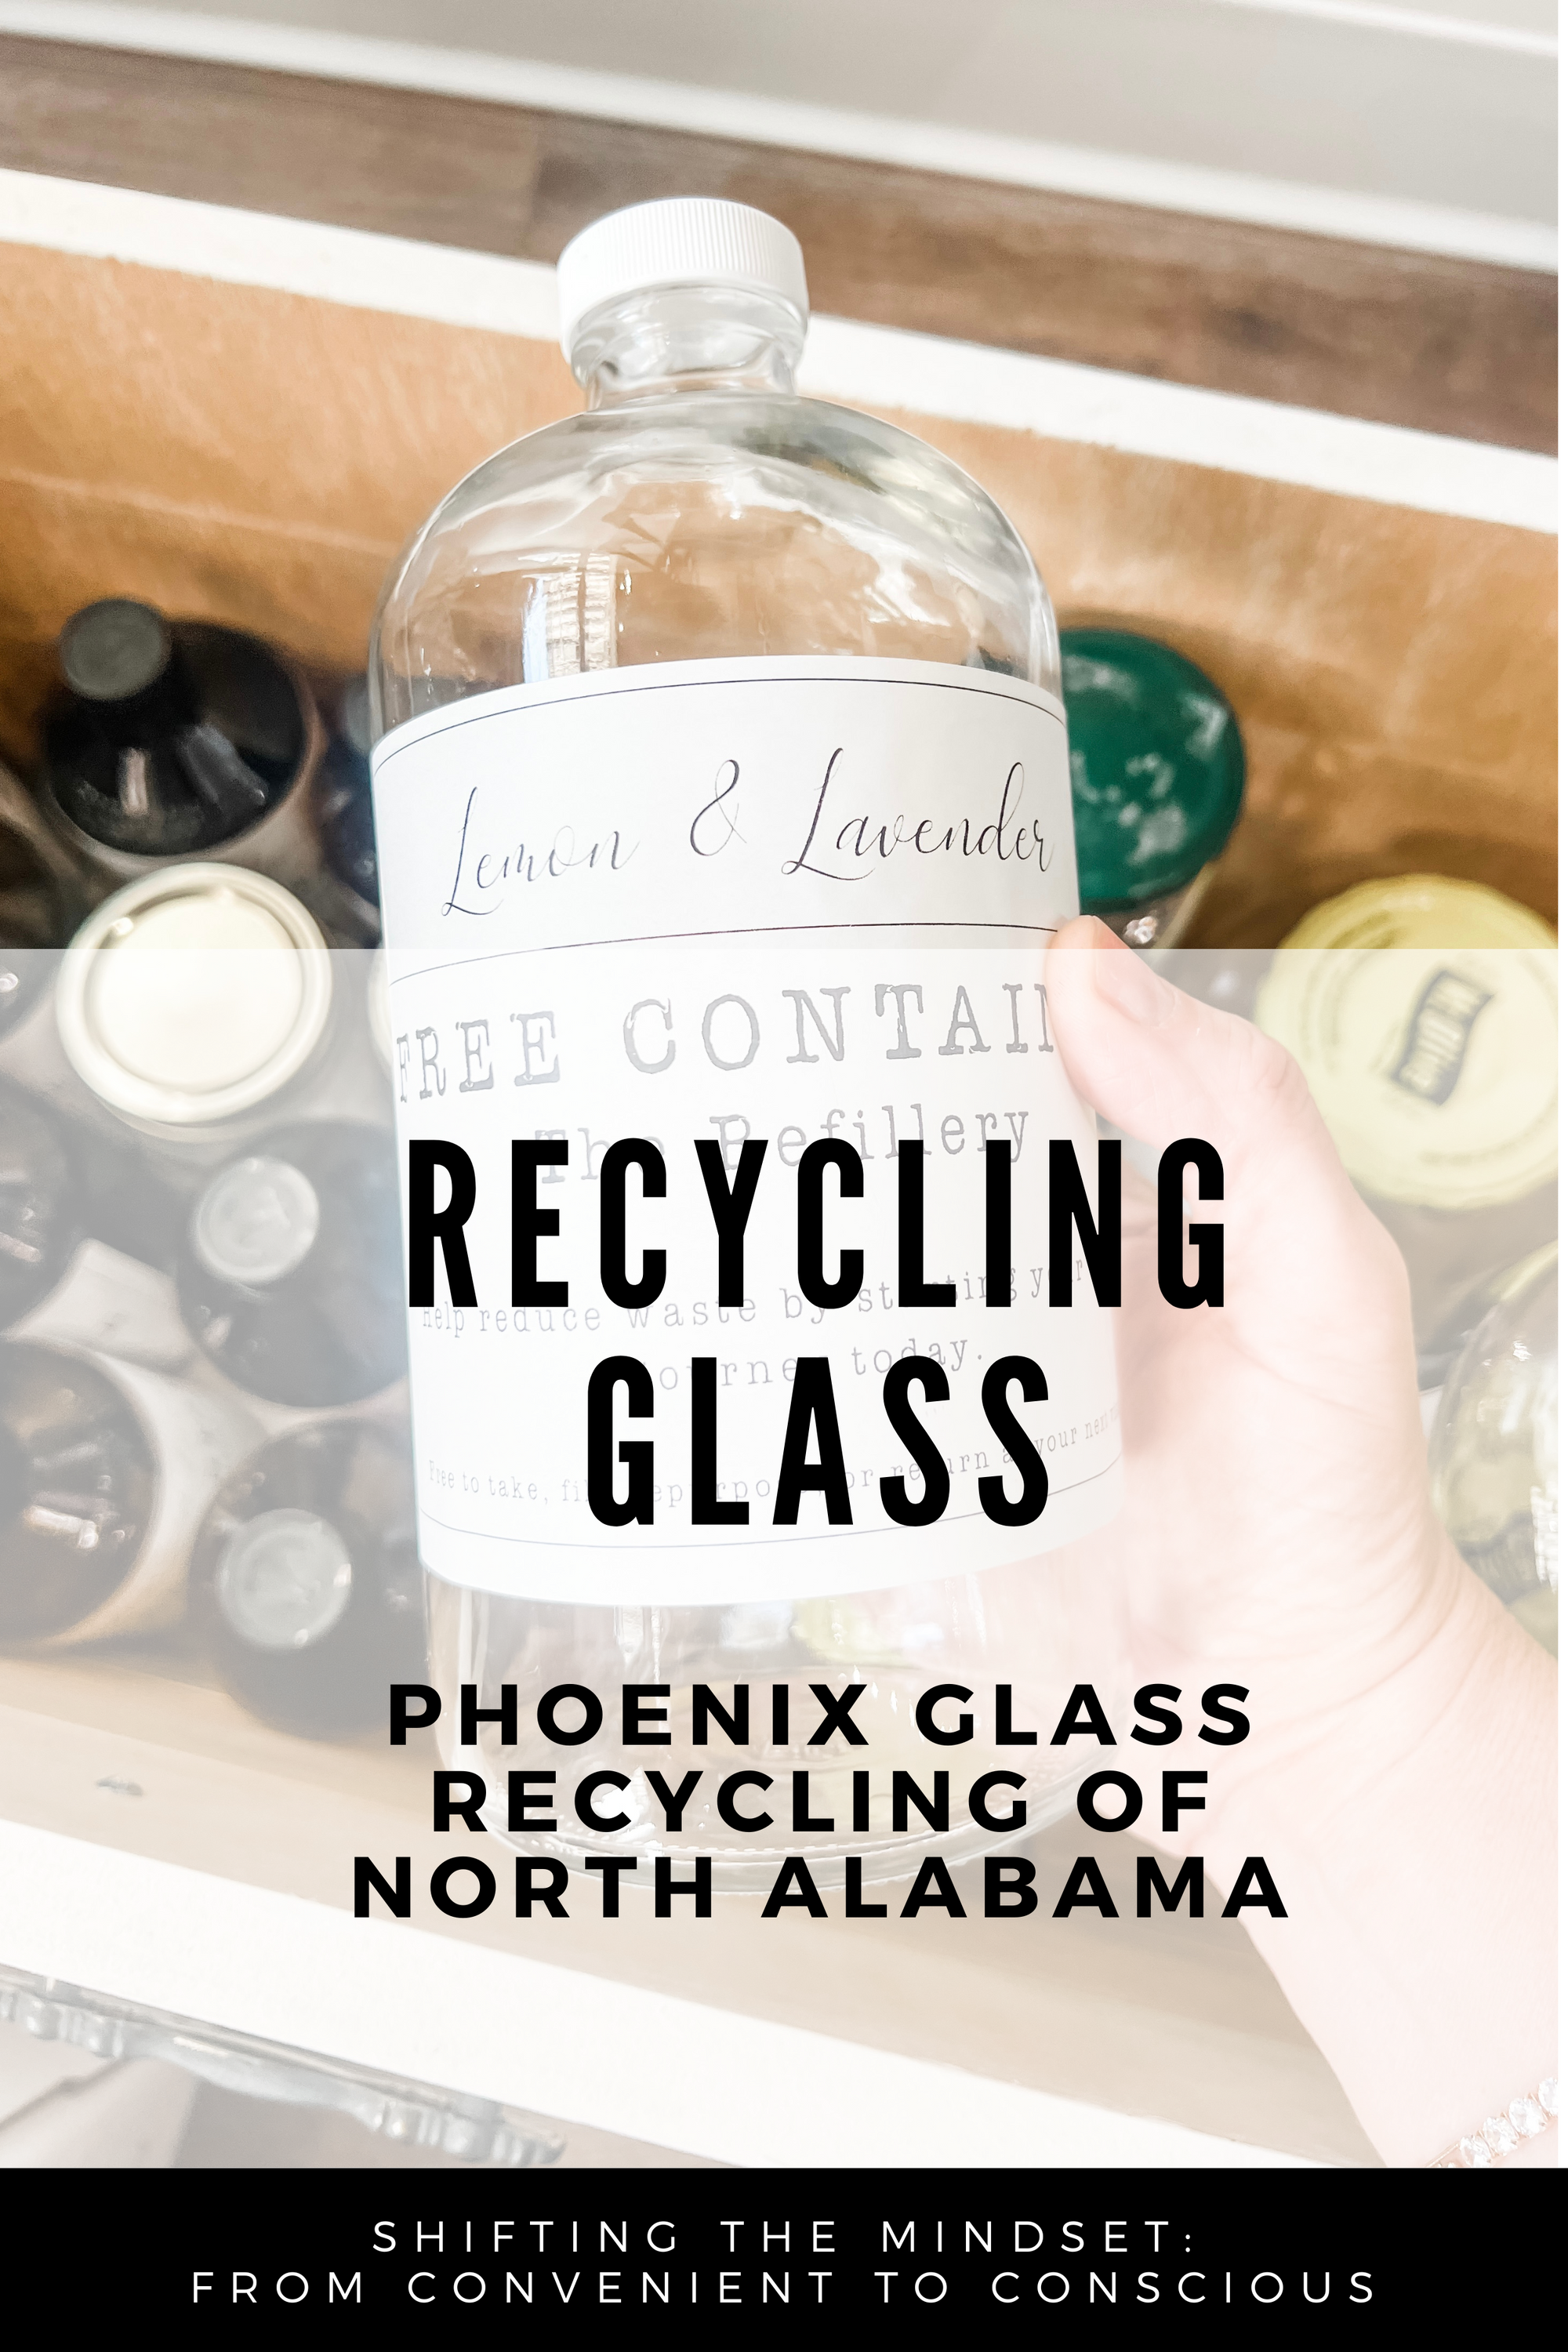 Collaborating with Phoenix Glass Recycling of North Alabama